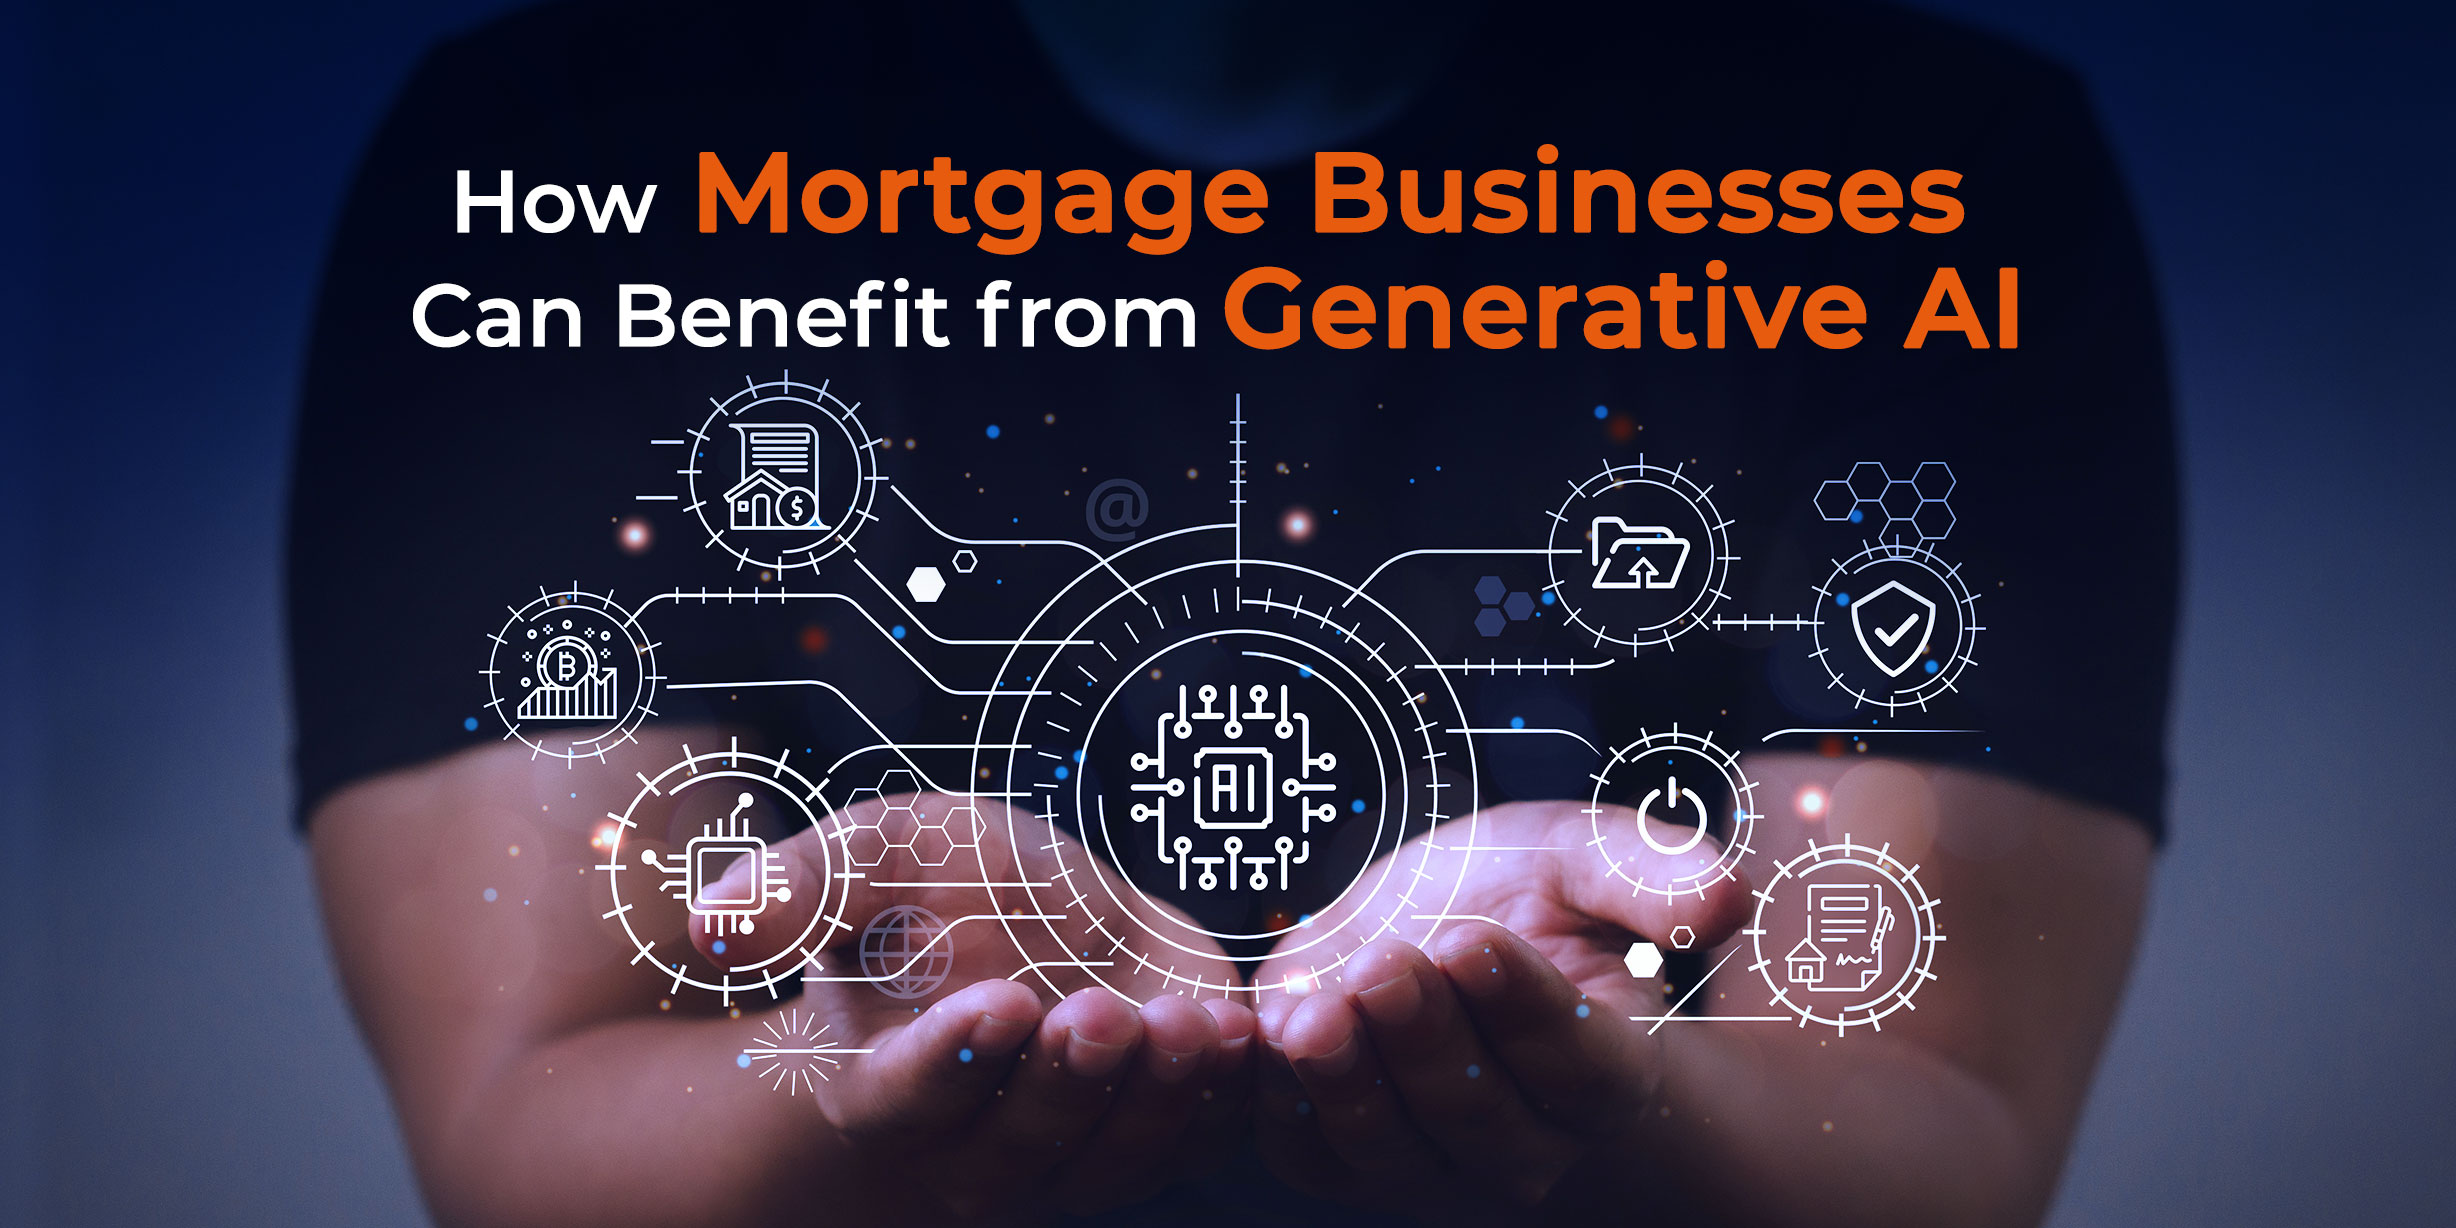 How Mortgage Businesses Can Benefit from Generative AI